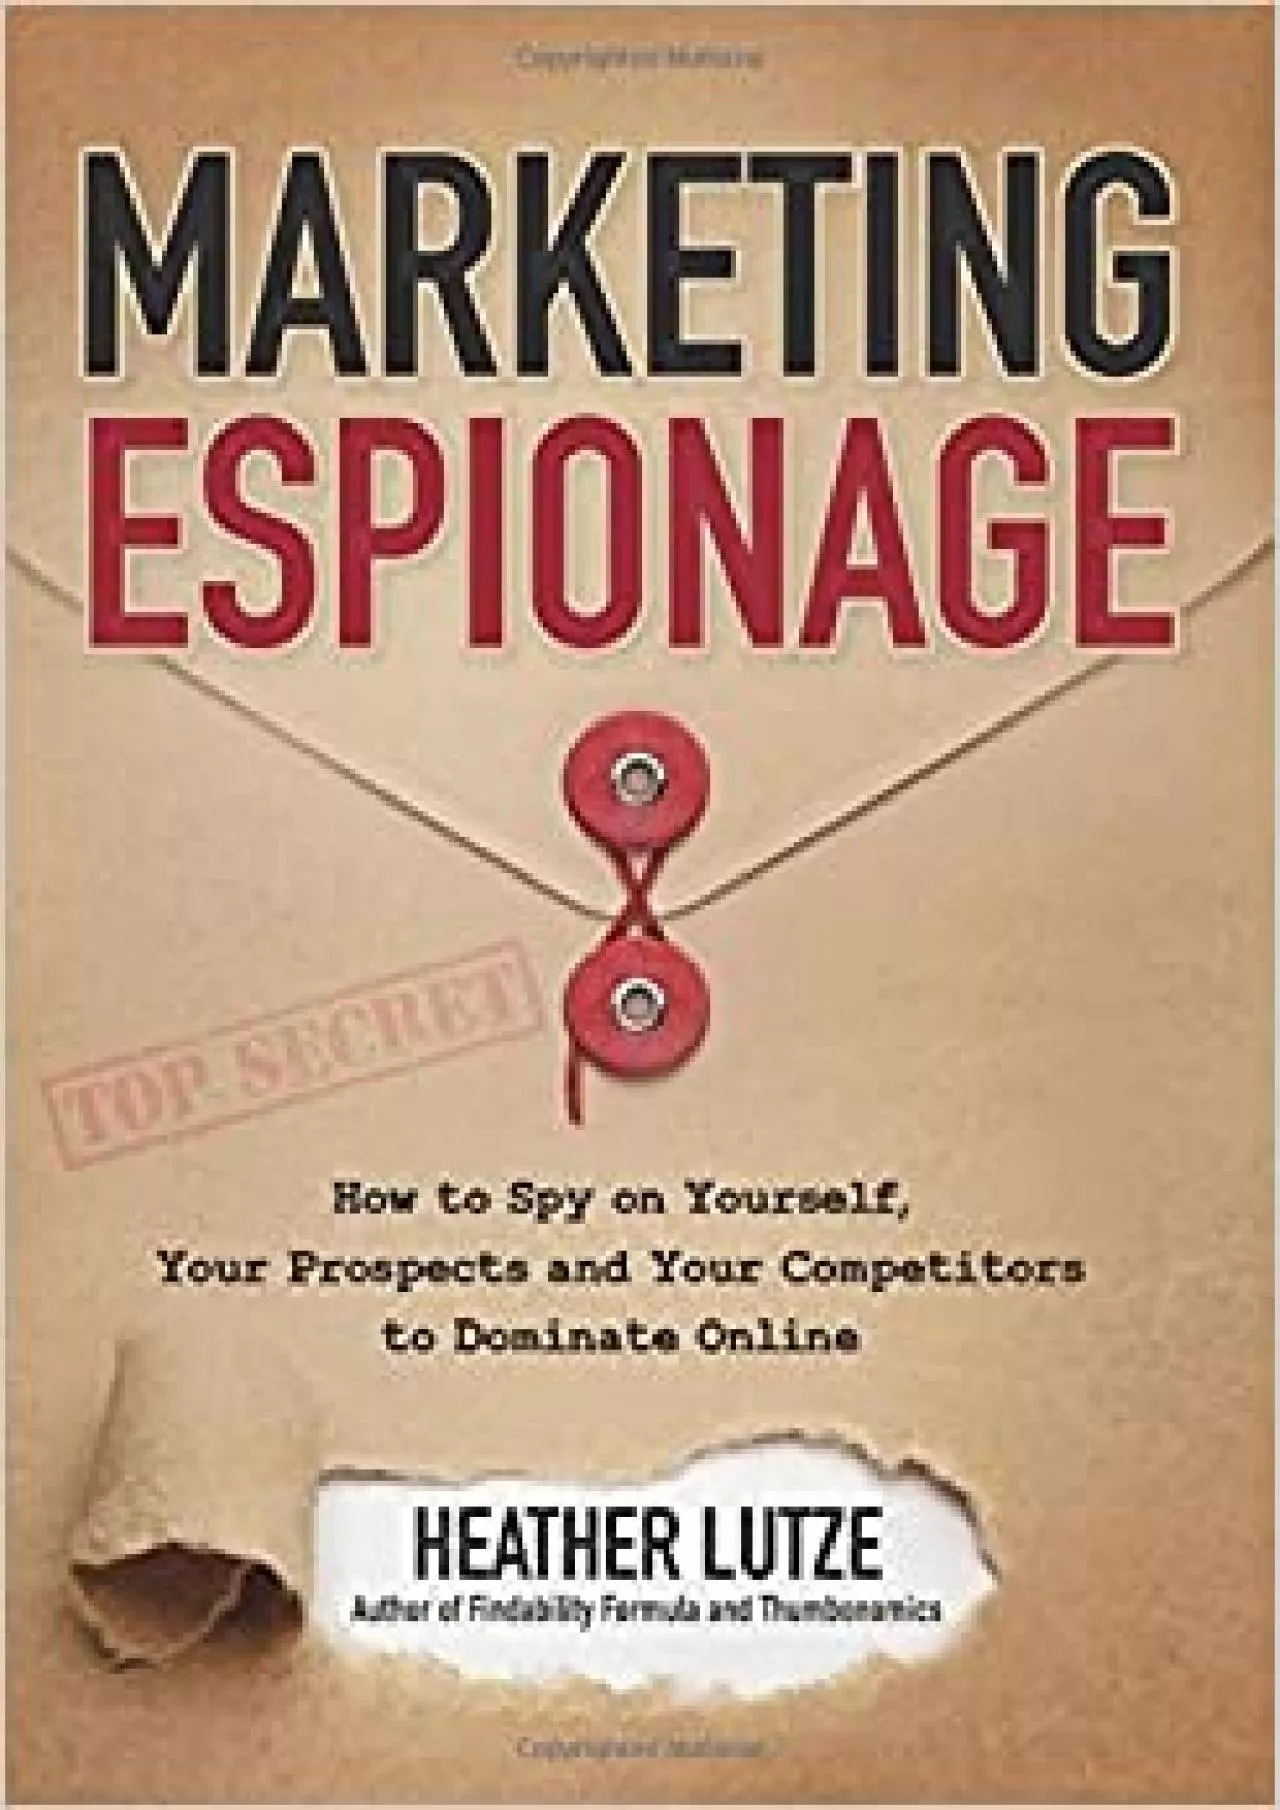 Marketing Espionage How to Spy on Yourself Your Prospects and Your Competitors to Dominate